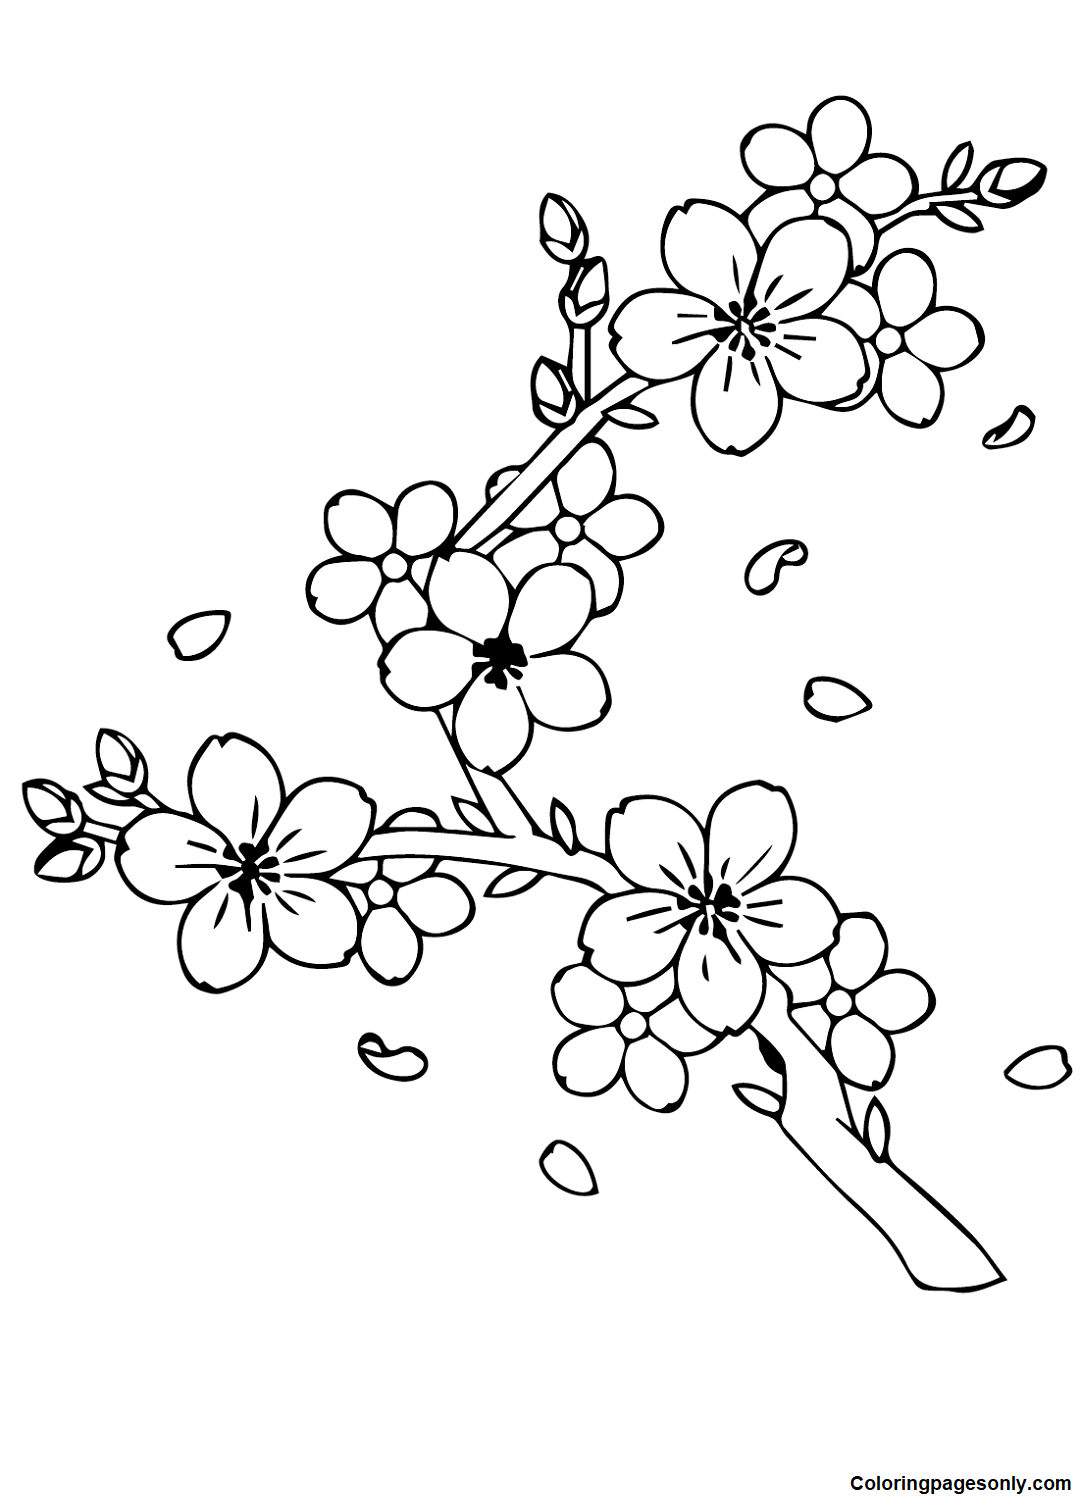 Cherry Blossom Images Coloring Pages